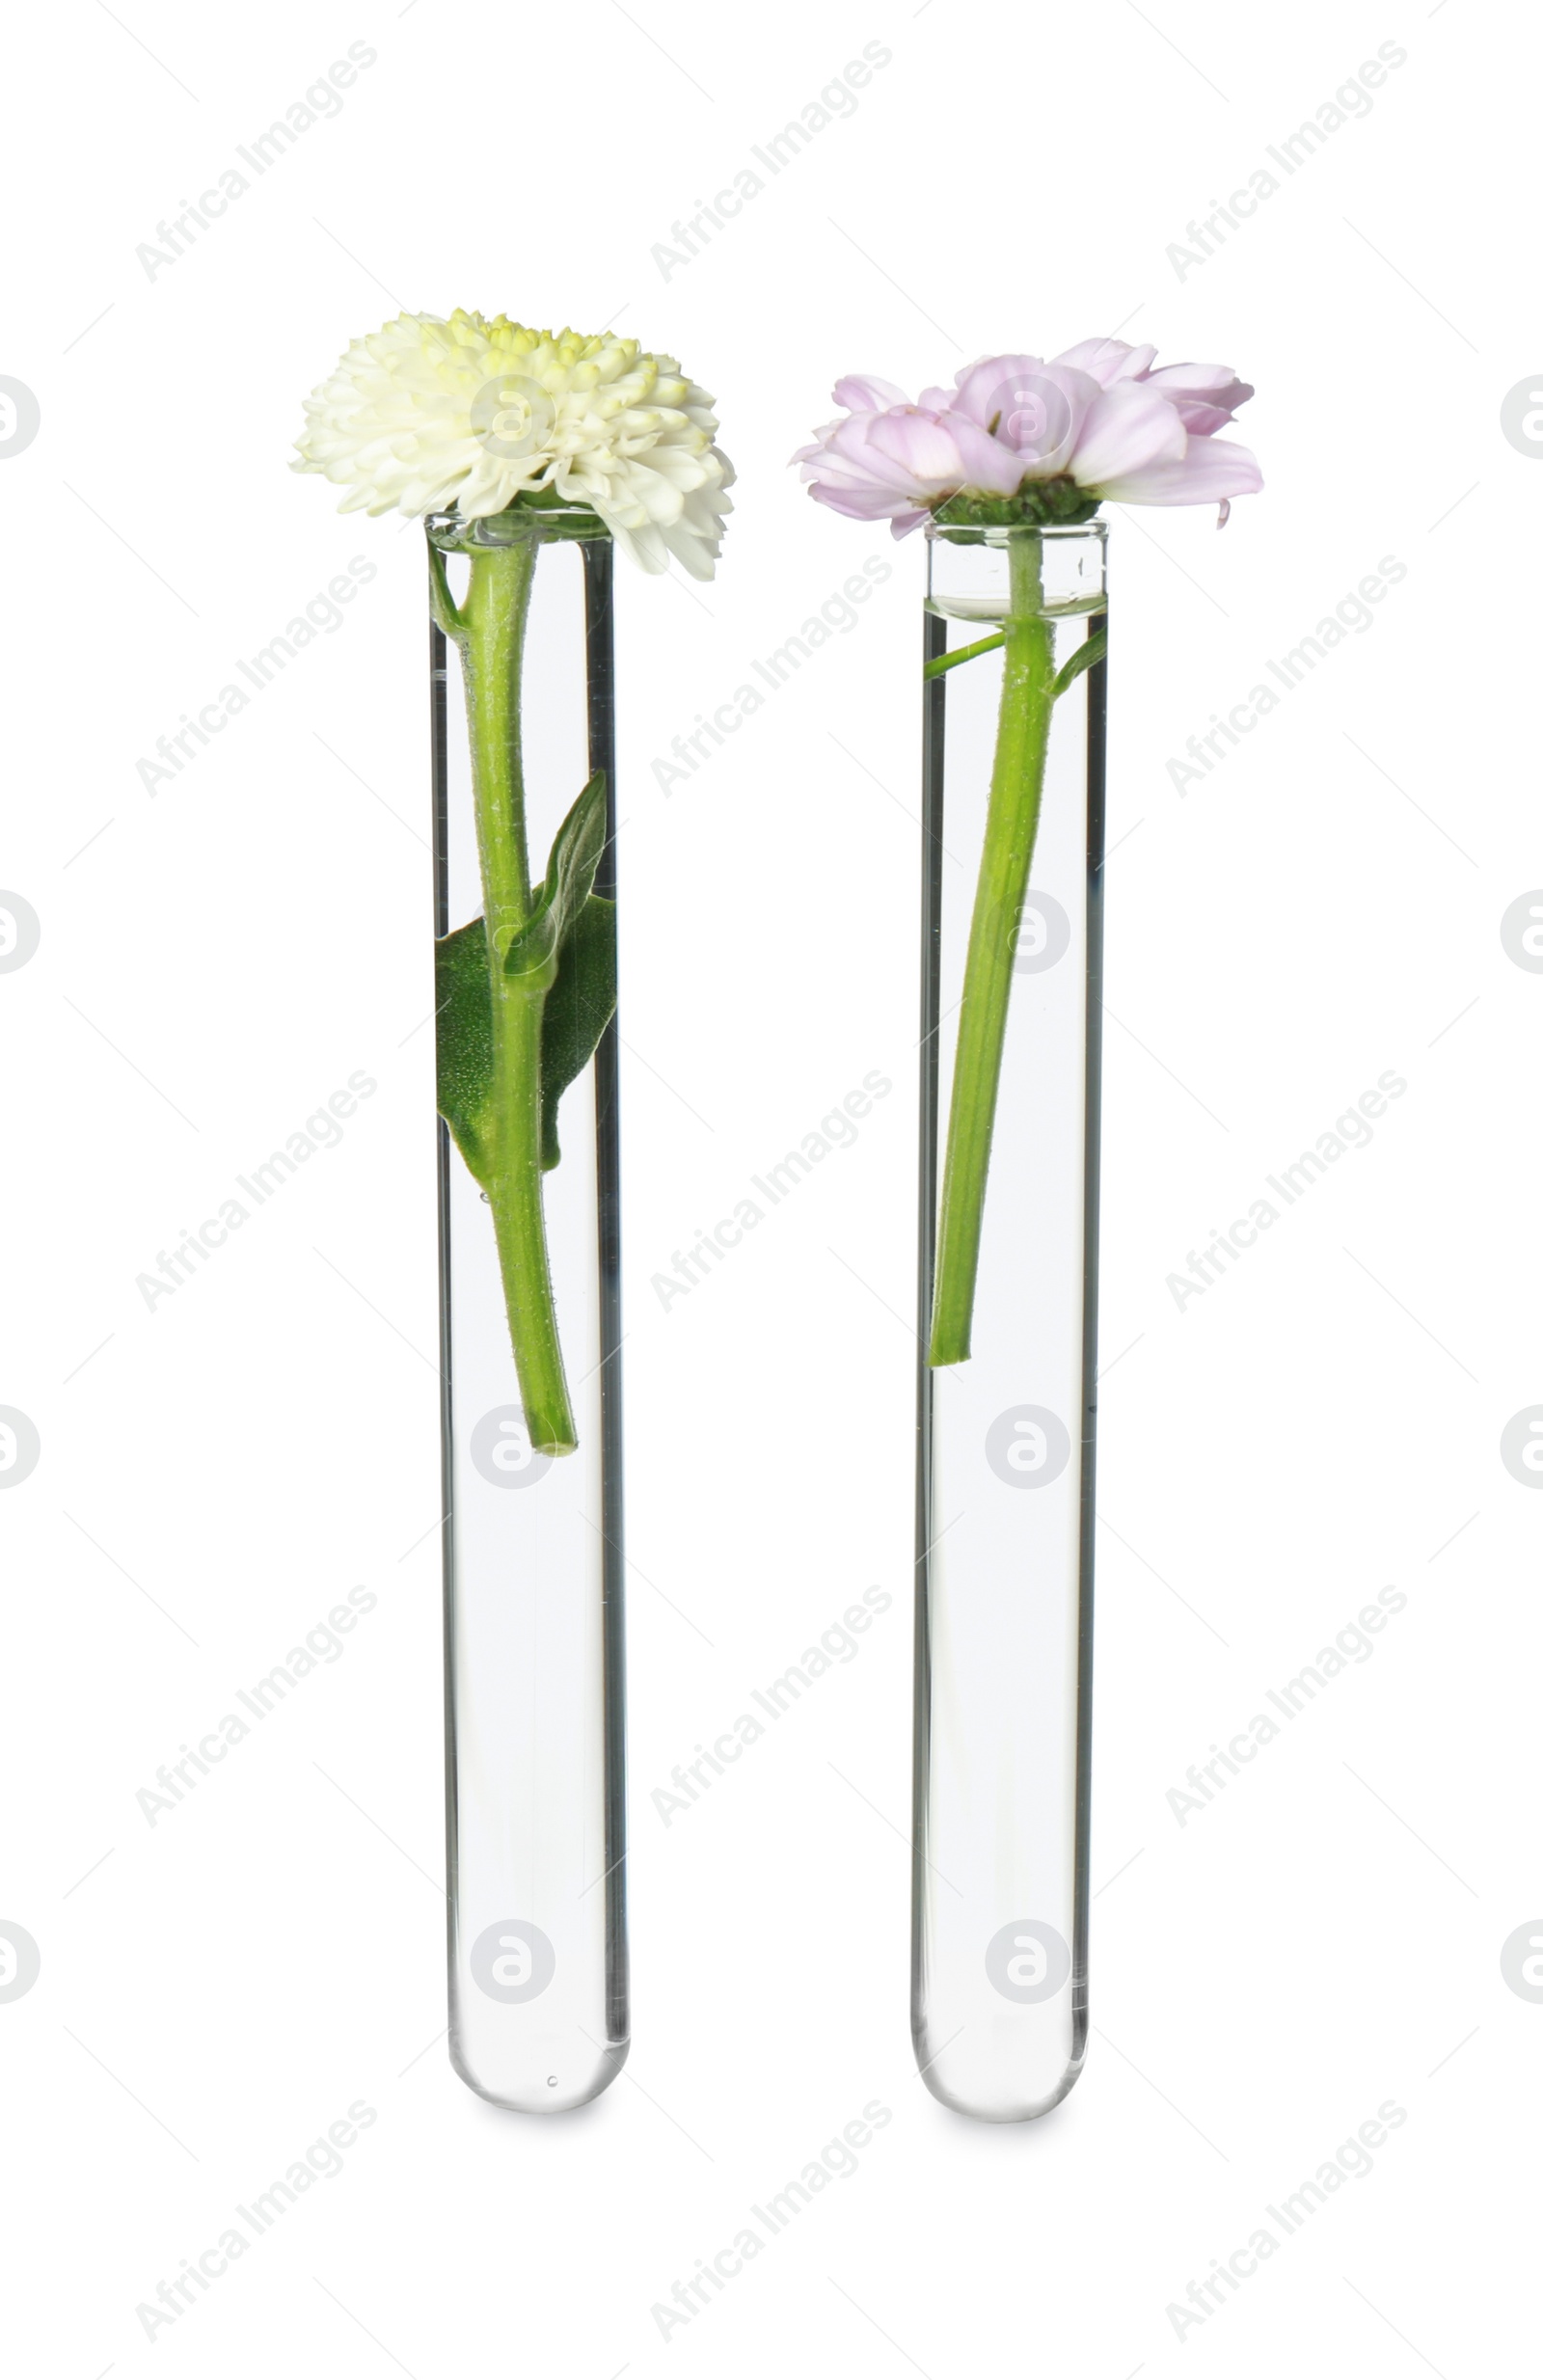 Photo of Different flowers in test tubes on white background